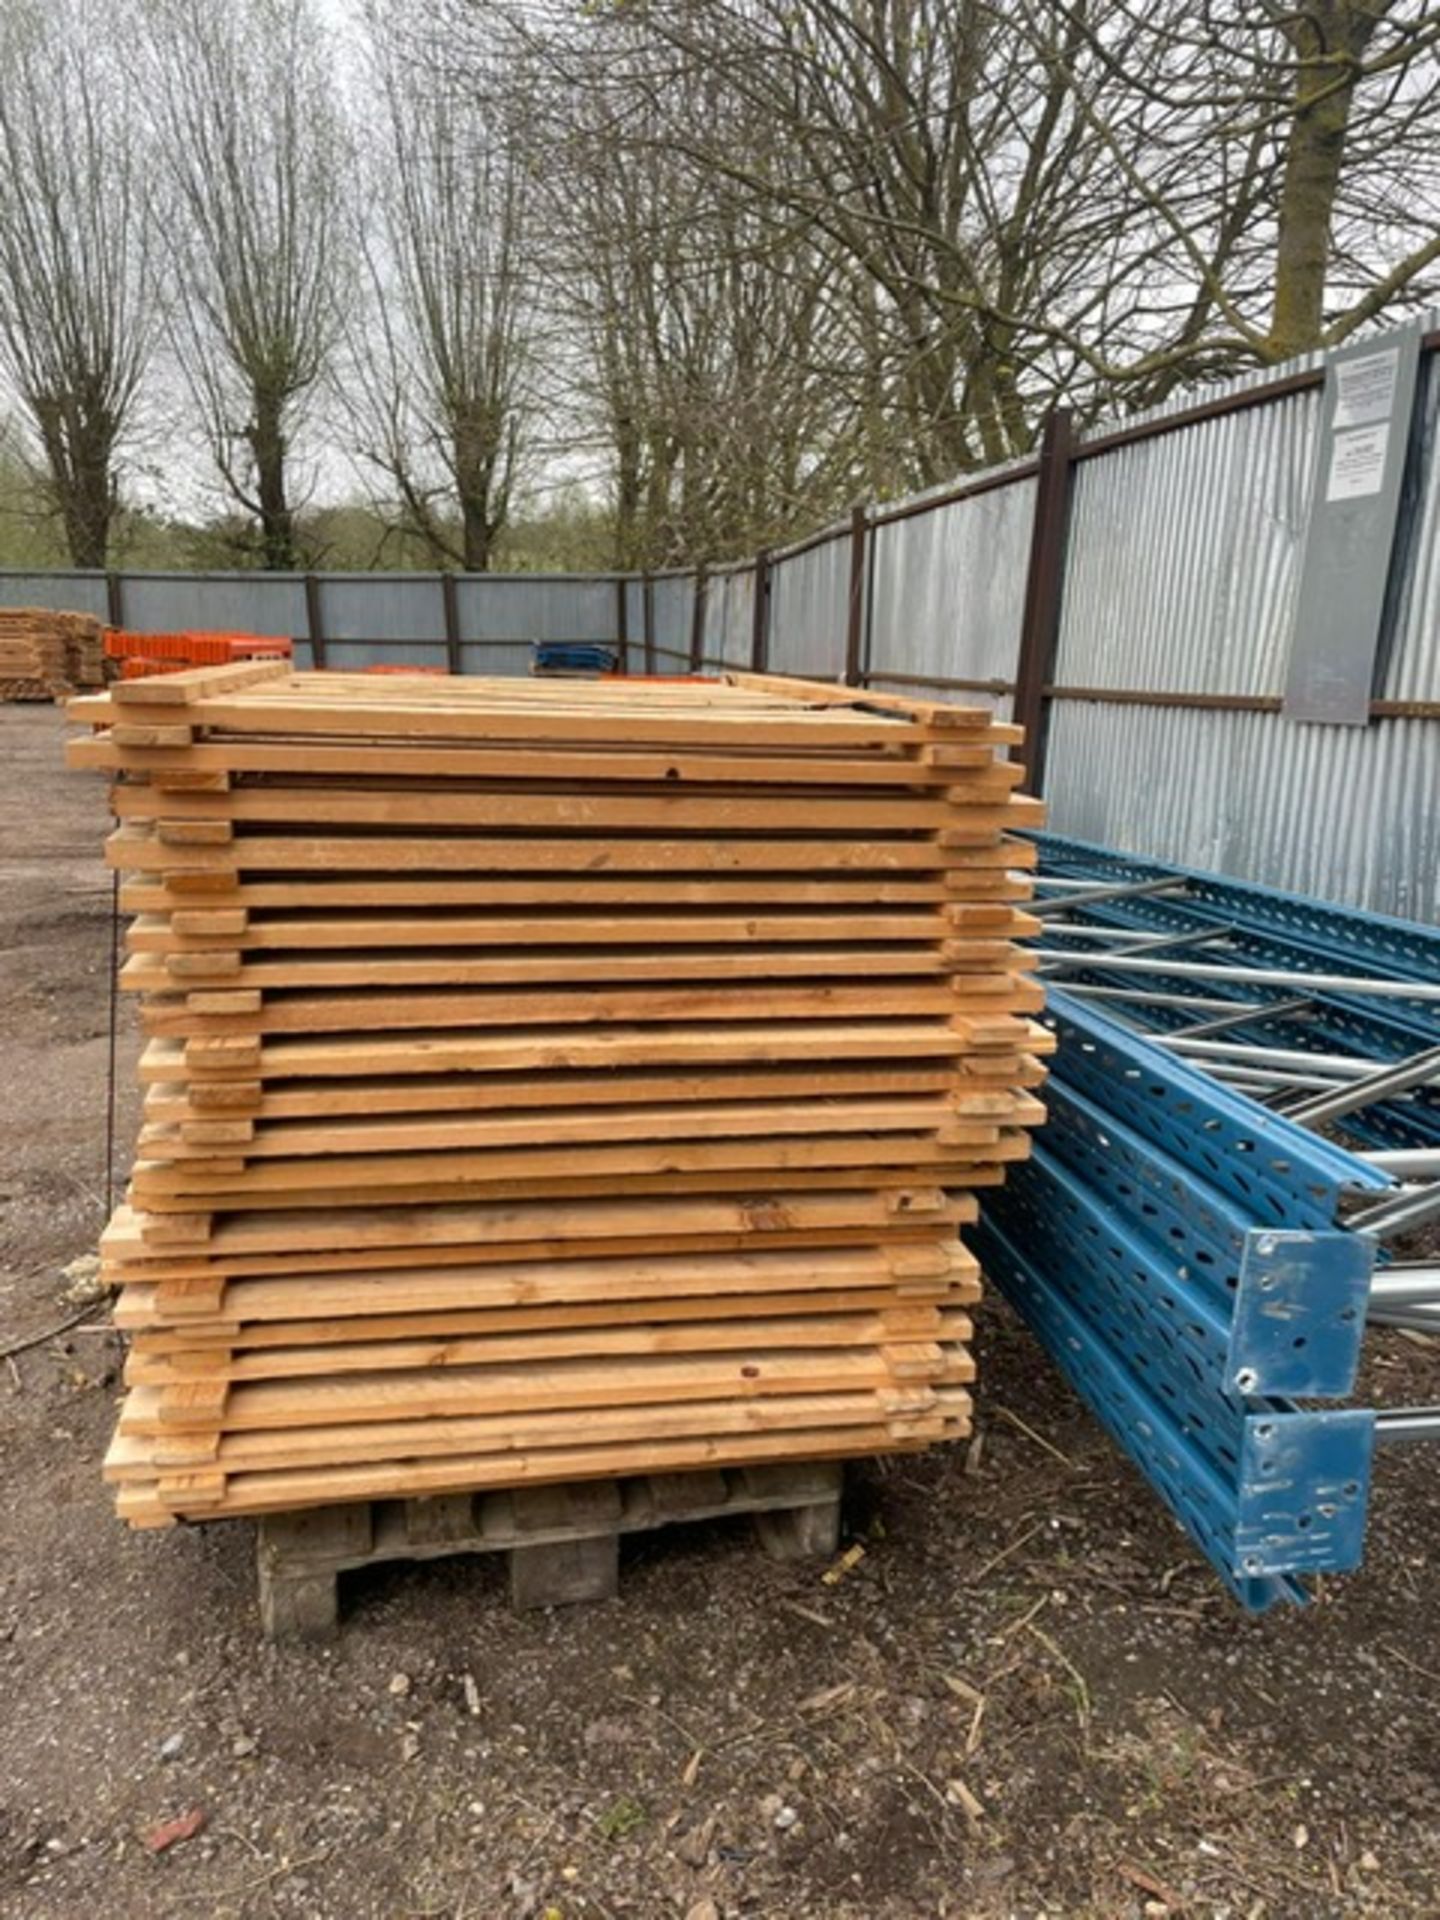 BUNDLE OF 4 BAYS OF PALLET RACKING WITH UPRIGHTS, BEAMS AND BOARDS - Image 2 of 7